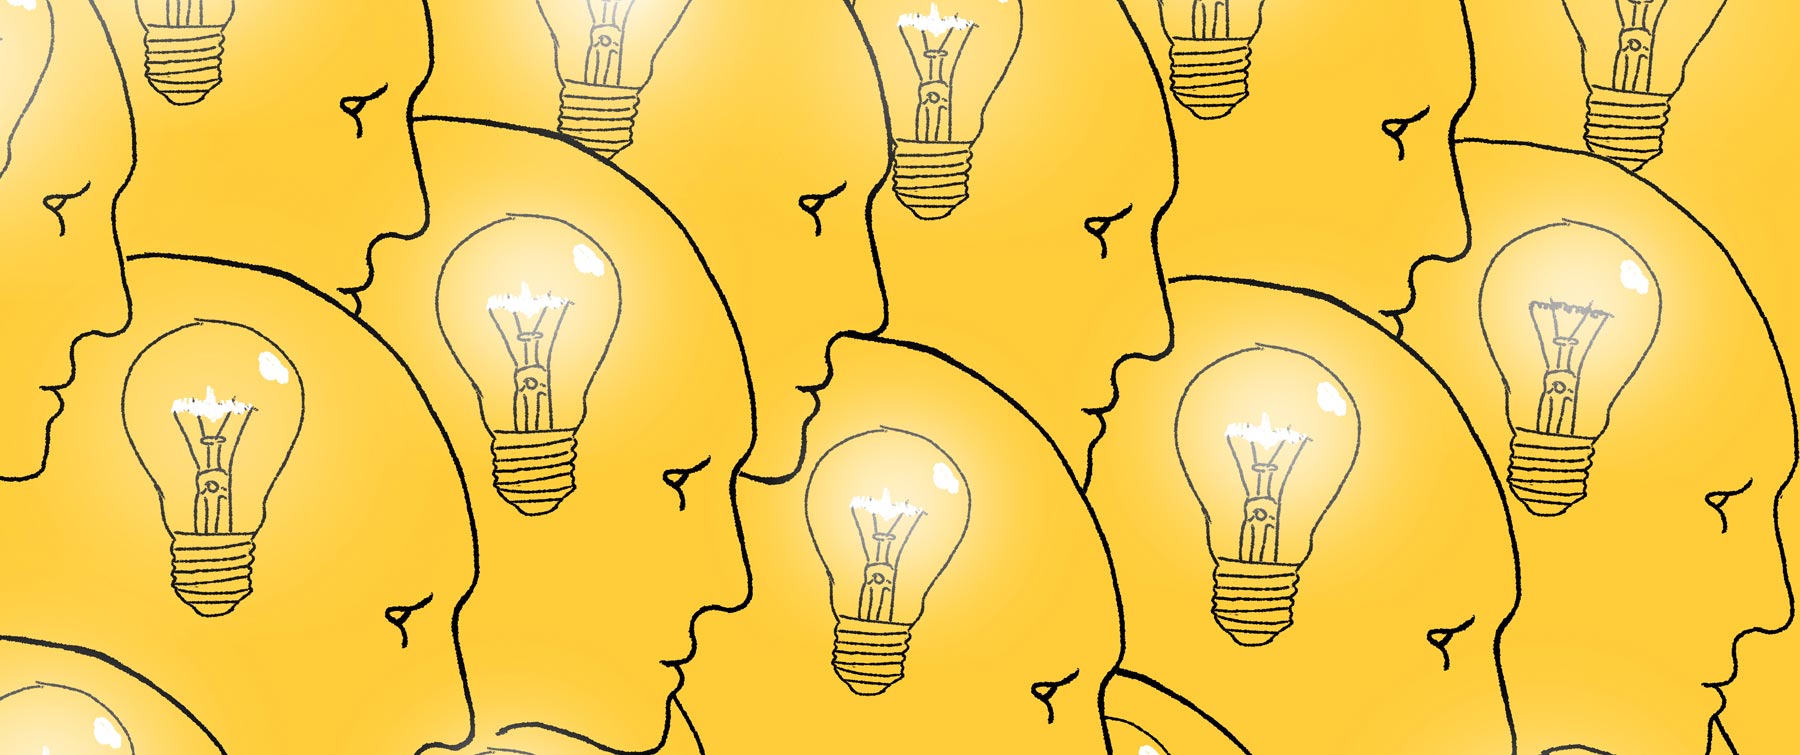 Light bulbs and collective intelligence illustrated